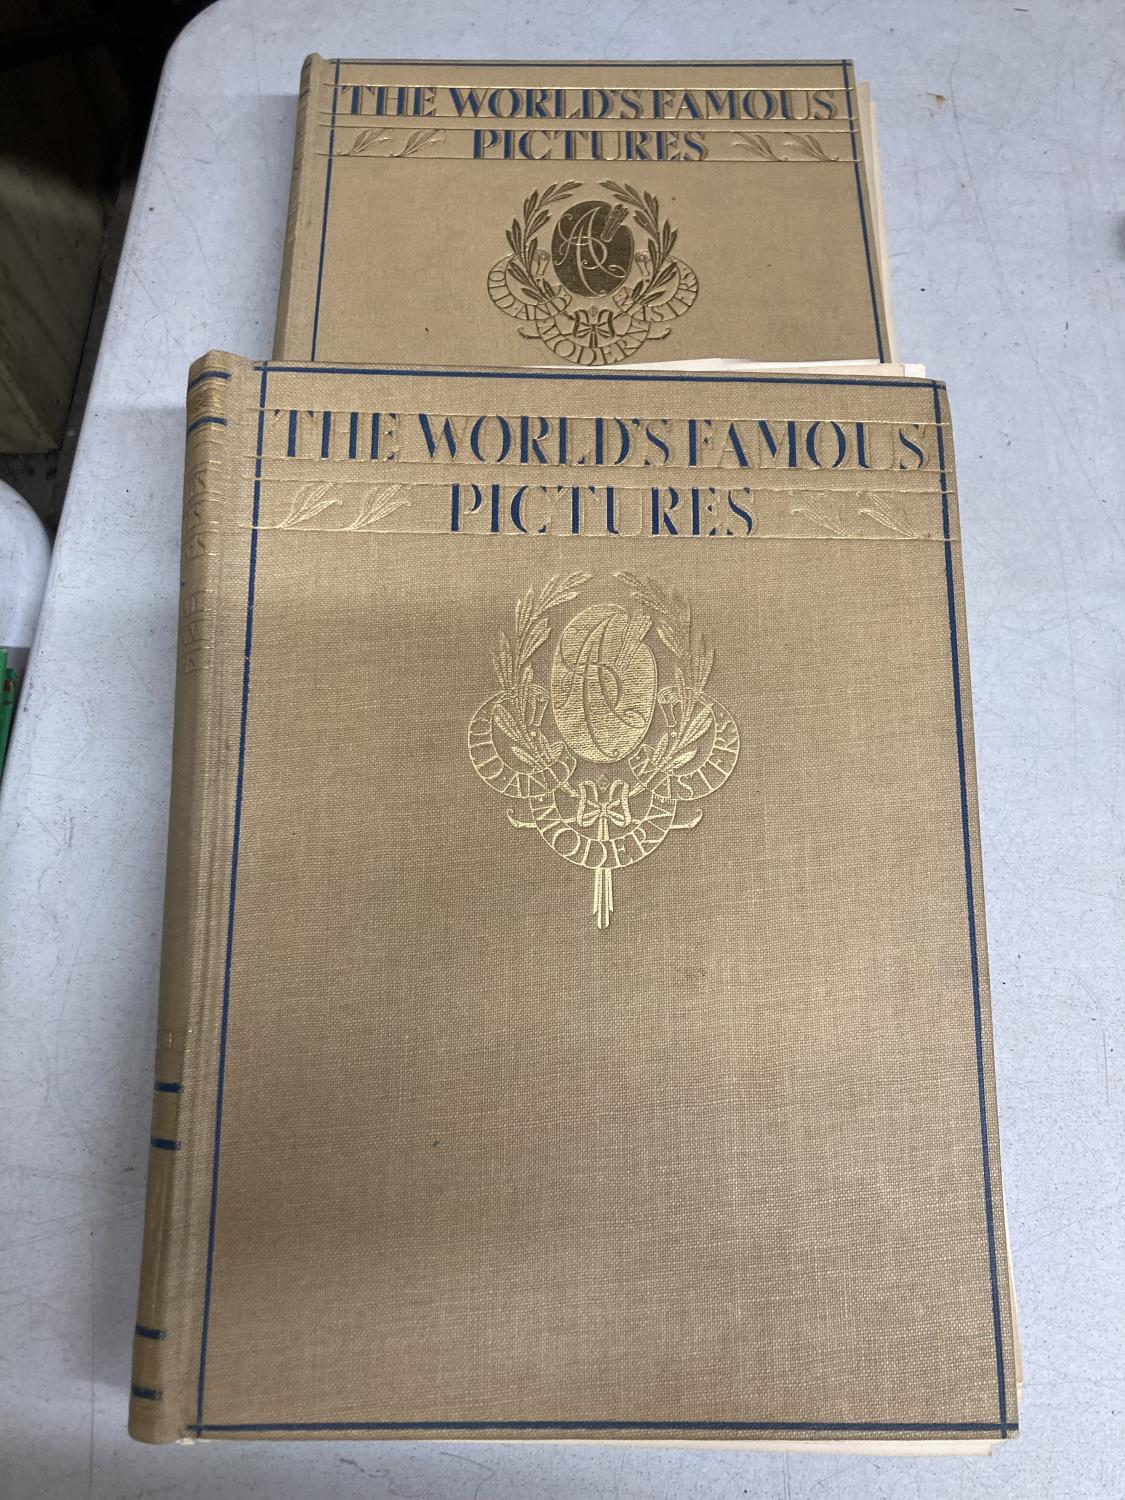 TWO HARDBACK COPIES OF 'THE WORLD'S FAMOUS PICTURES' OLD AND MODERN MASTERS - VOLUME 1 AND 2